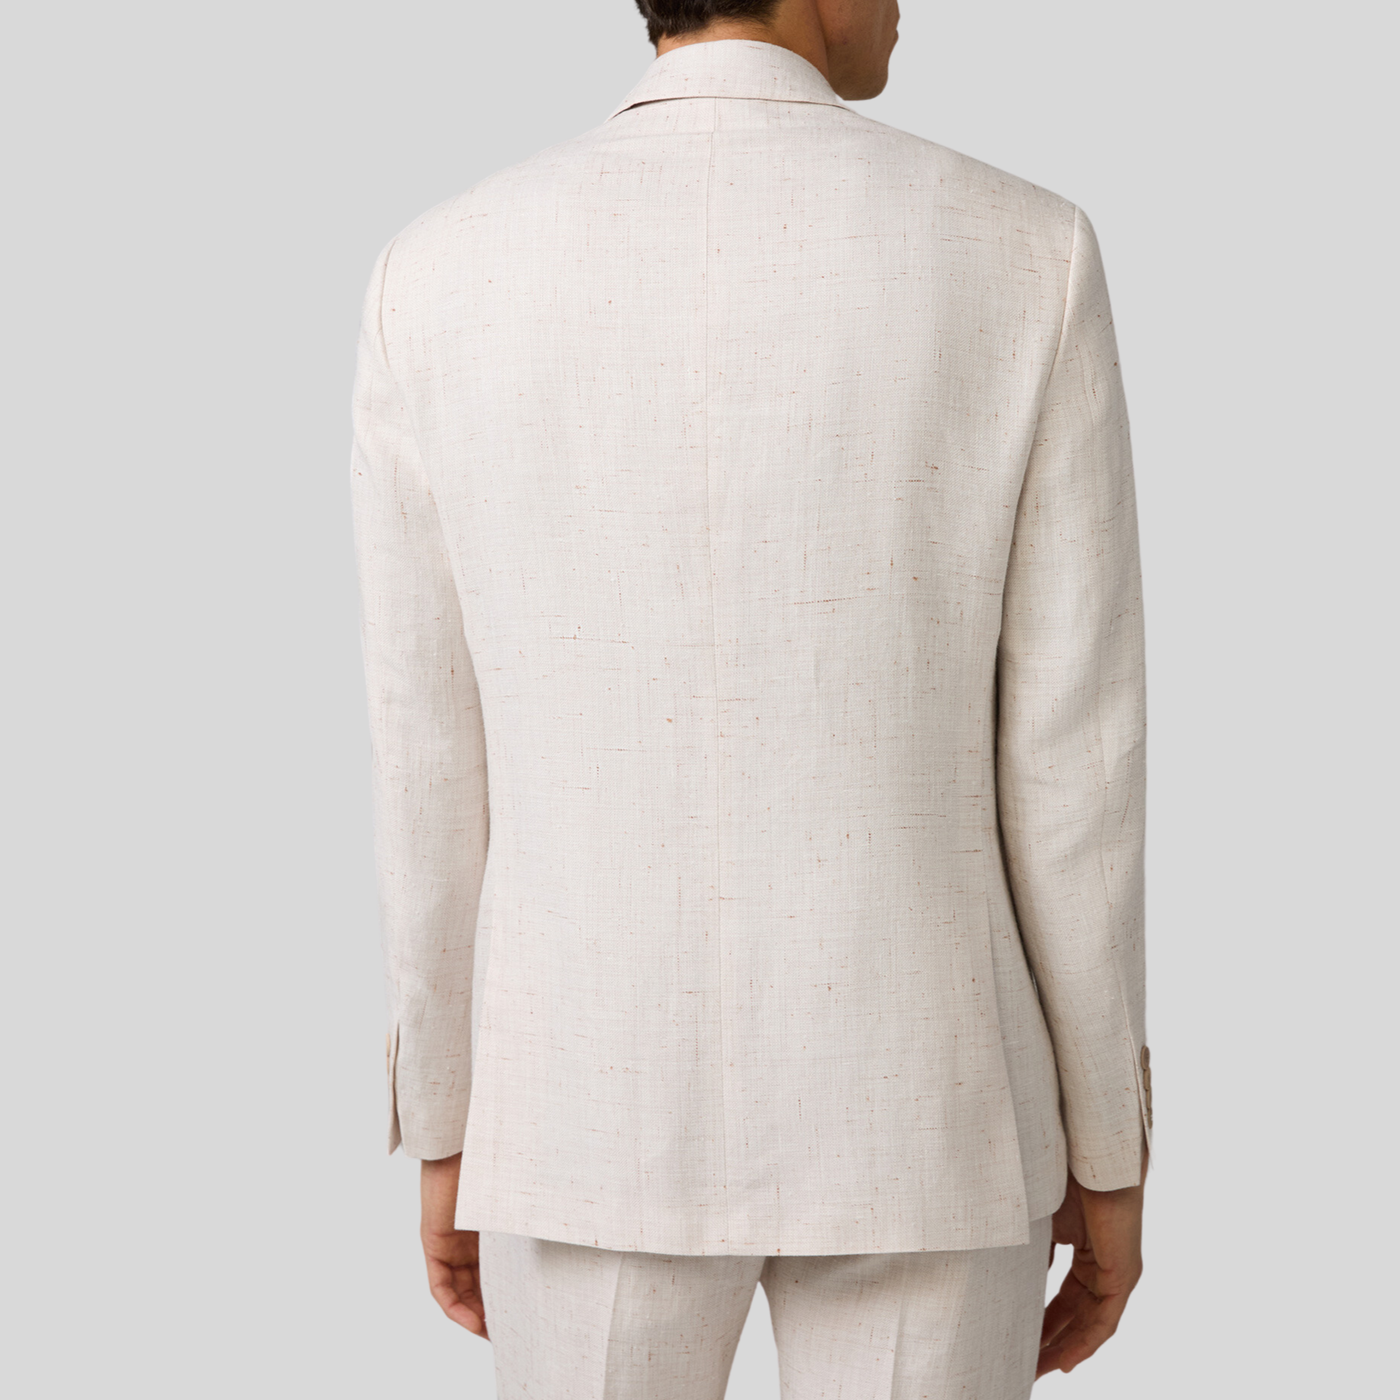 Gotstyle Fashion - Strellson Suits Mottled Linen Blend Double Breasted Suit Jacket - Off-White